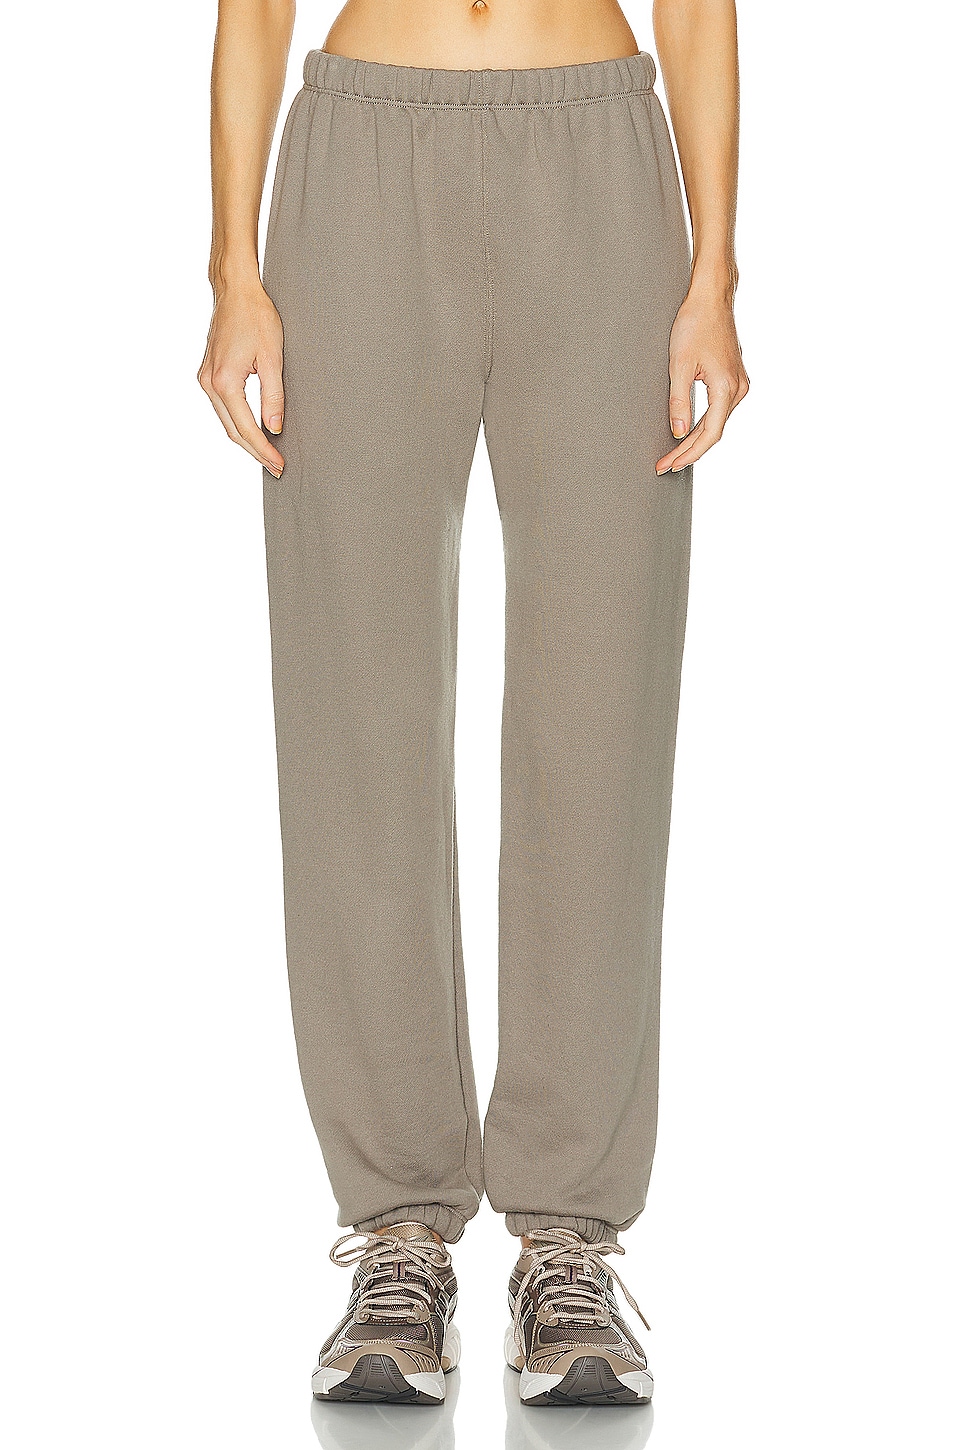 Image 1 of Eterne Classic Sweatpant in Clay